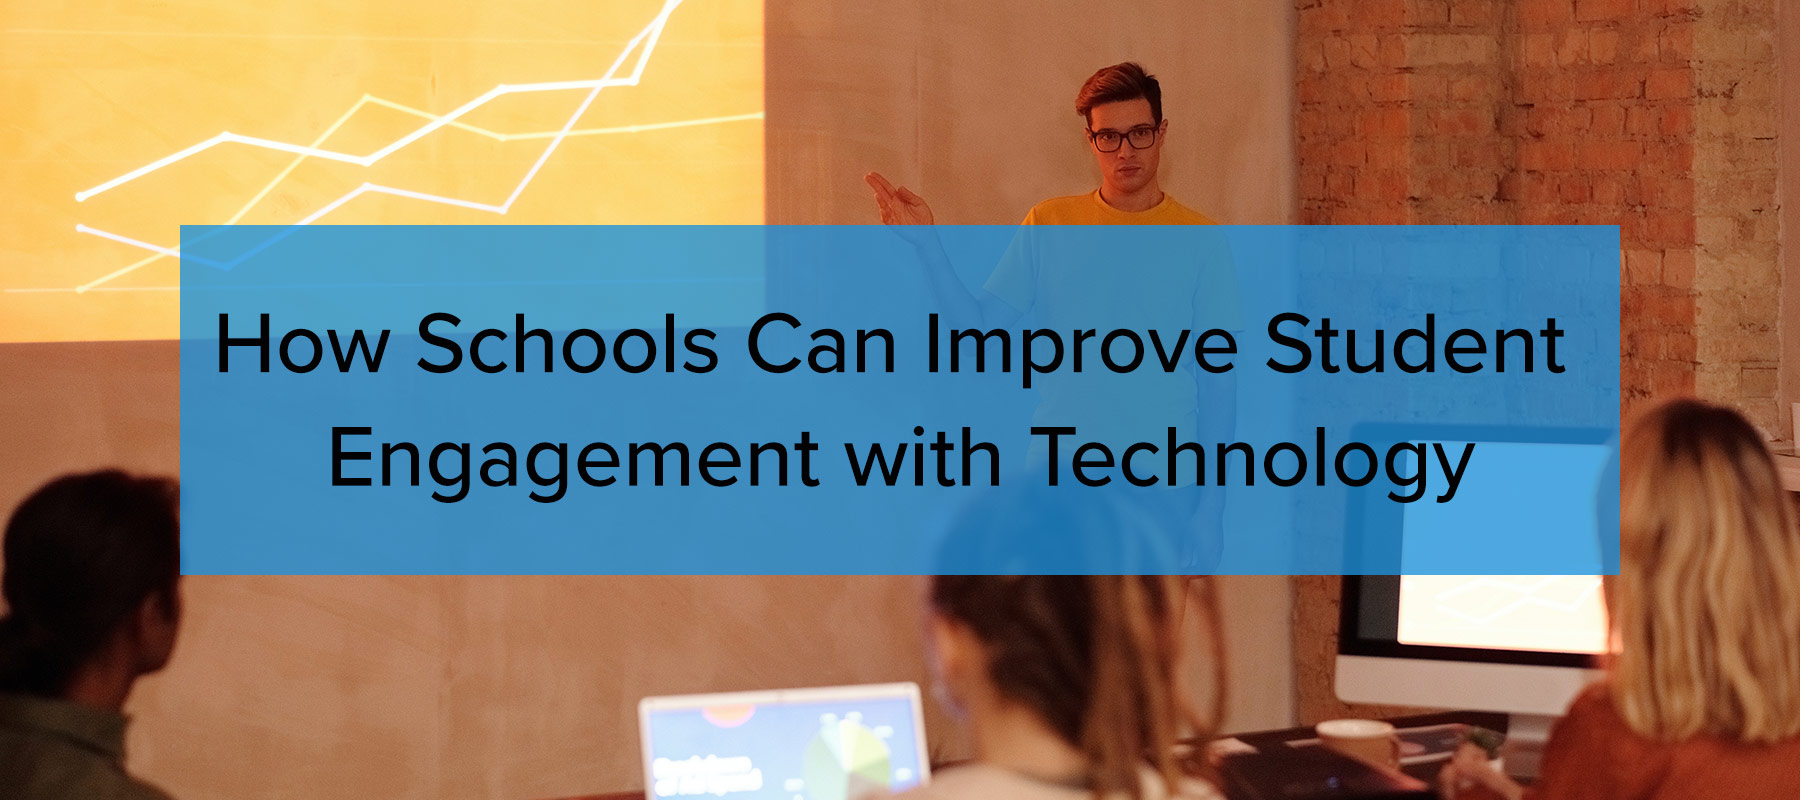 How Schools Can Improve Student Engagement with Technology